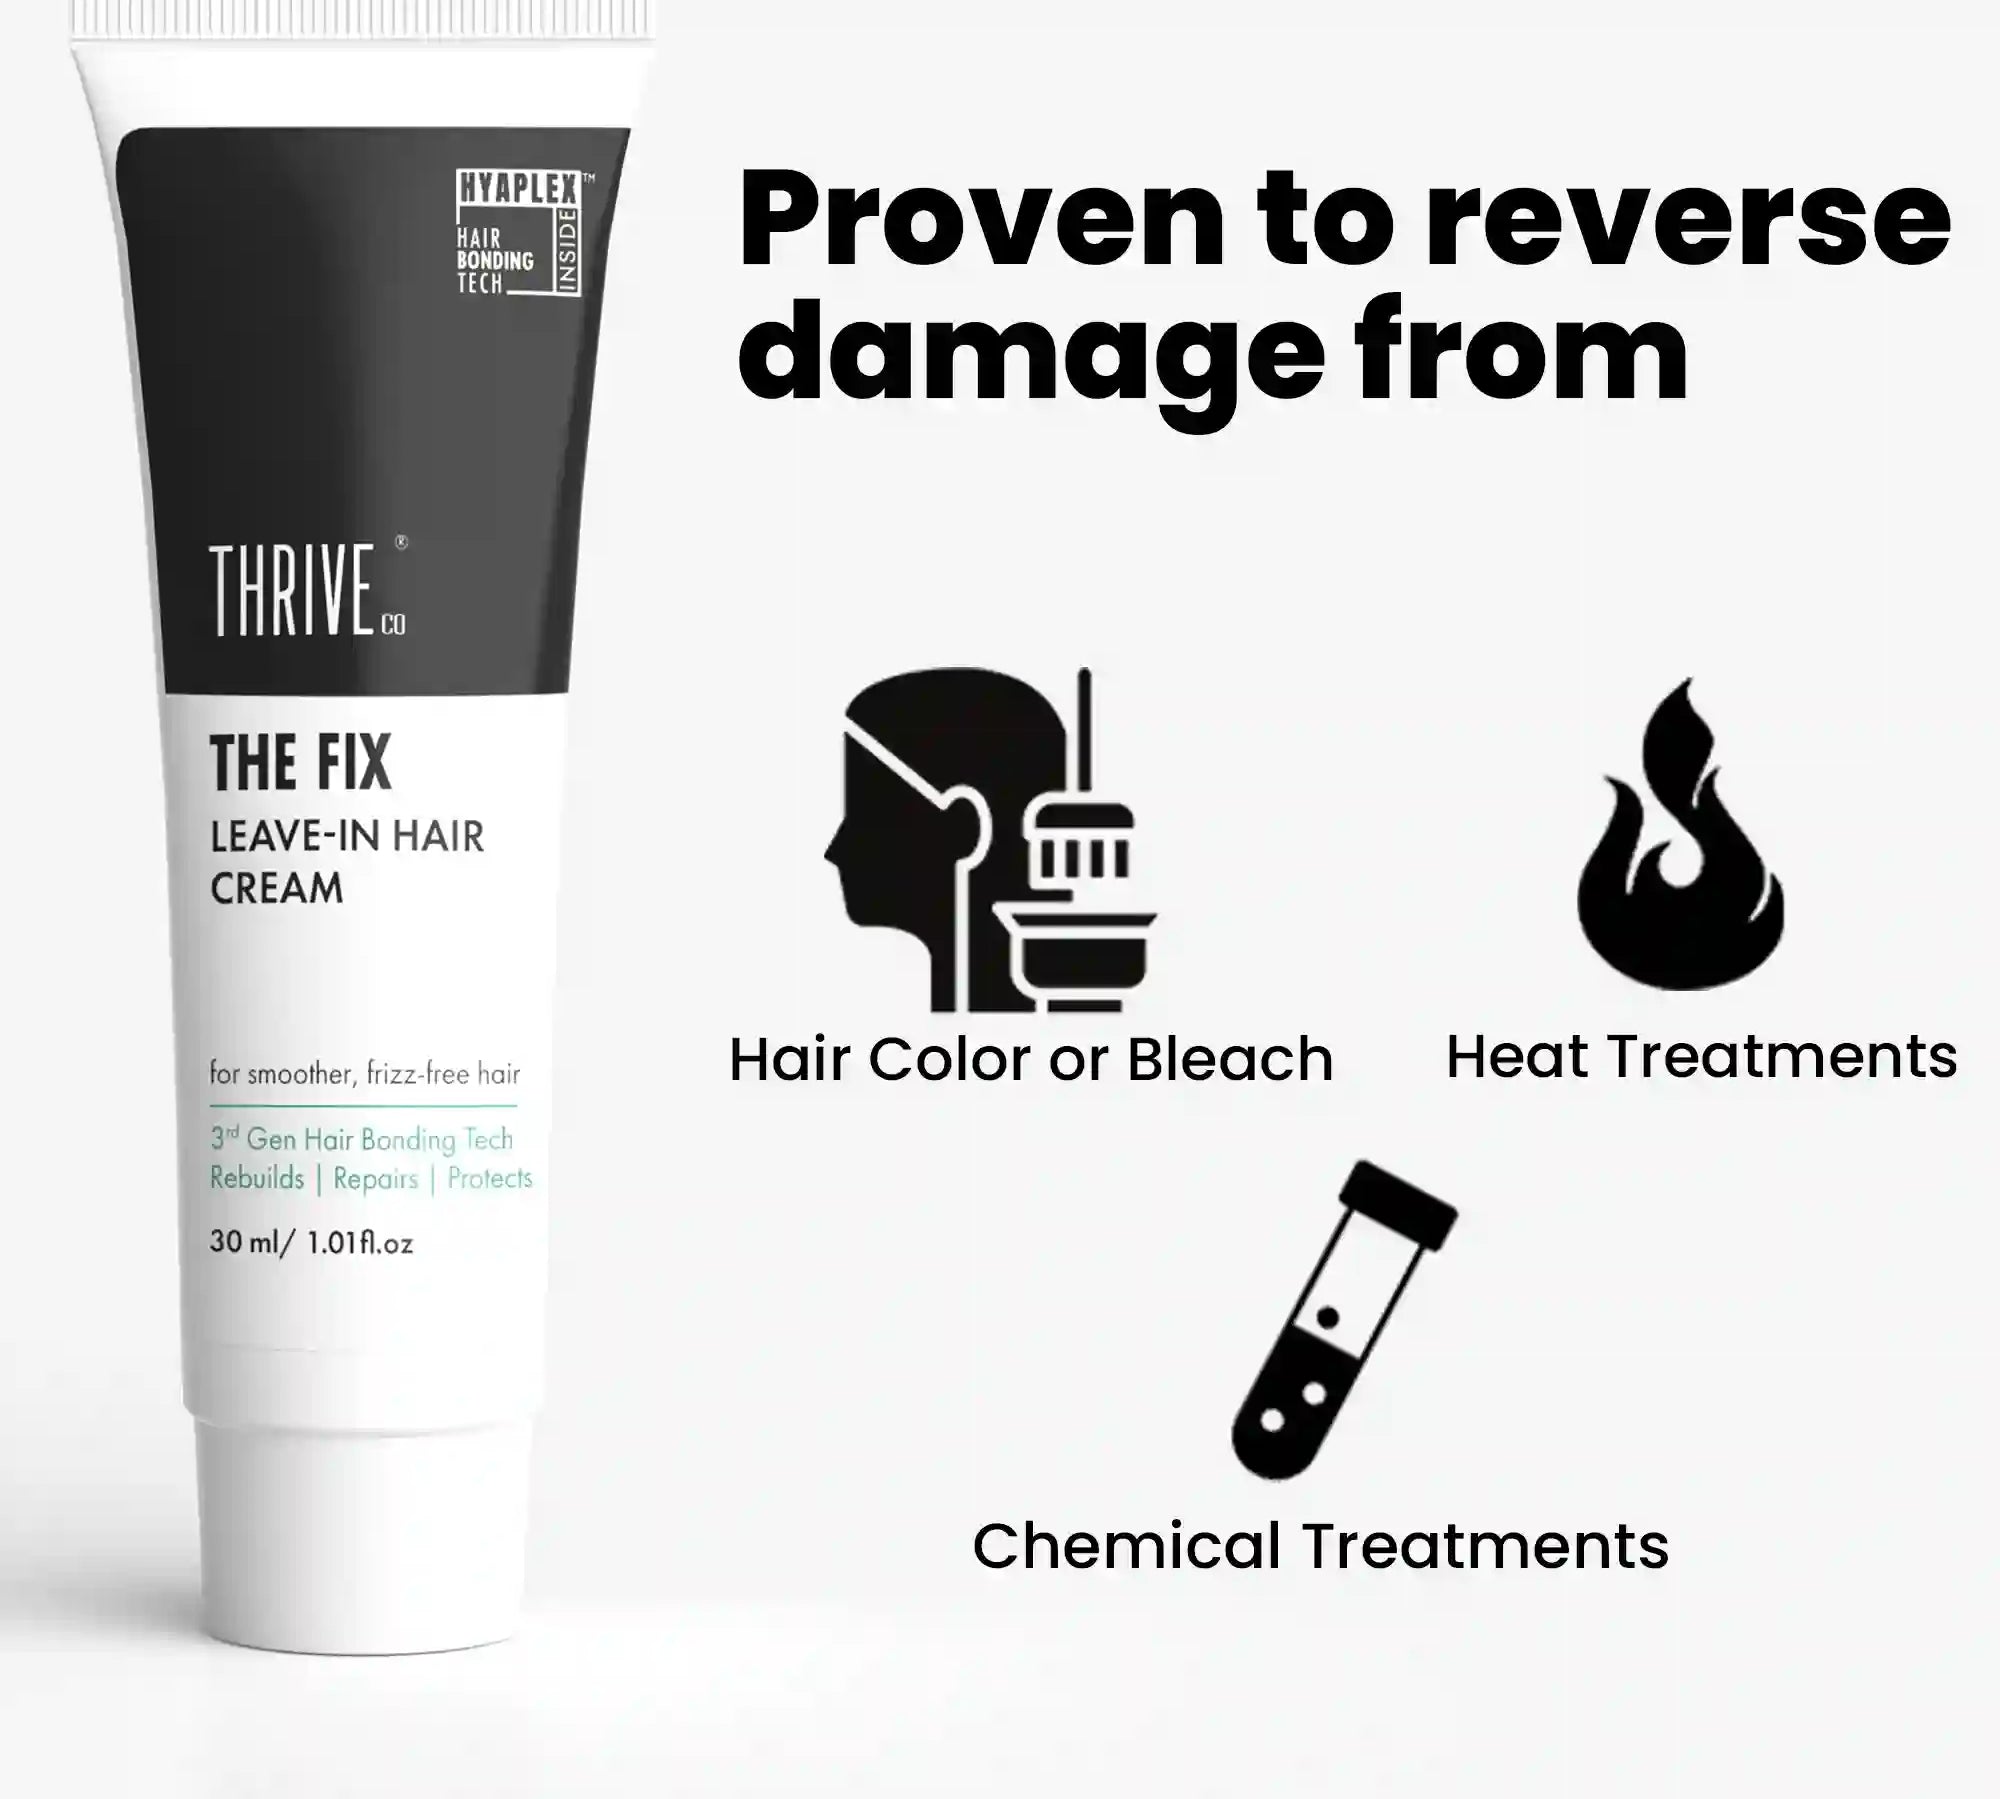 ThriveCo The Fix leave-in hair cream for damaged hair